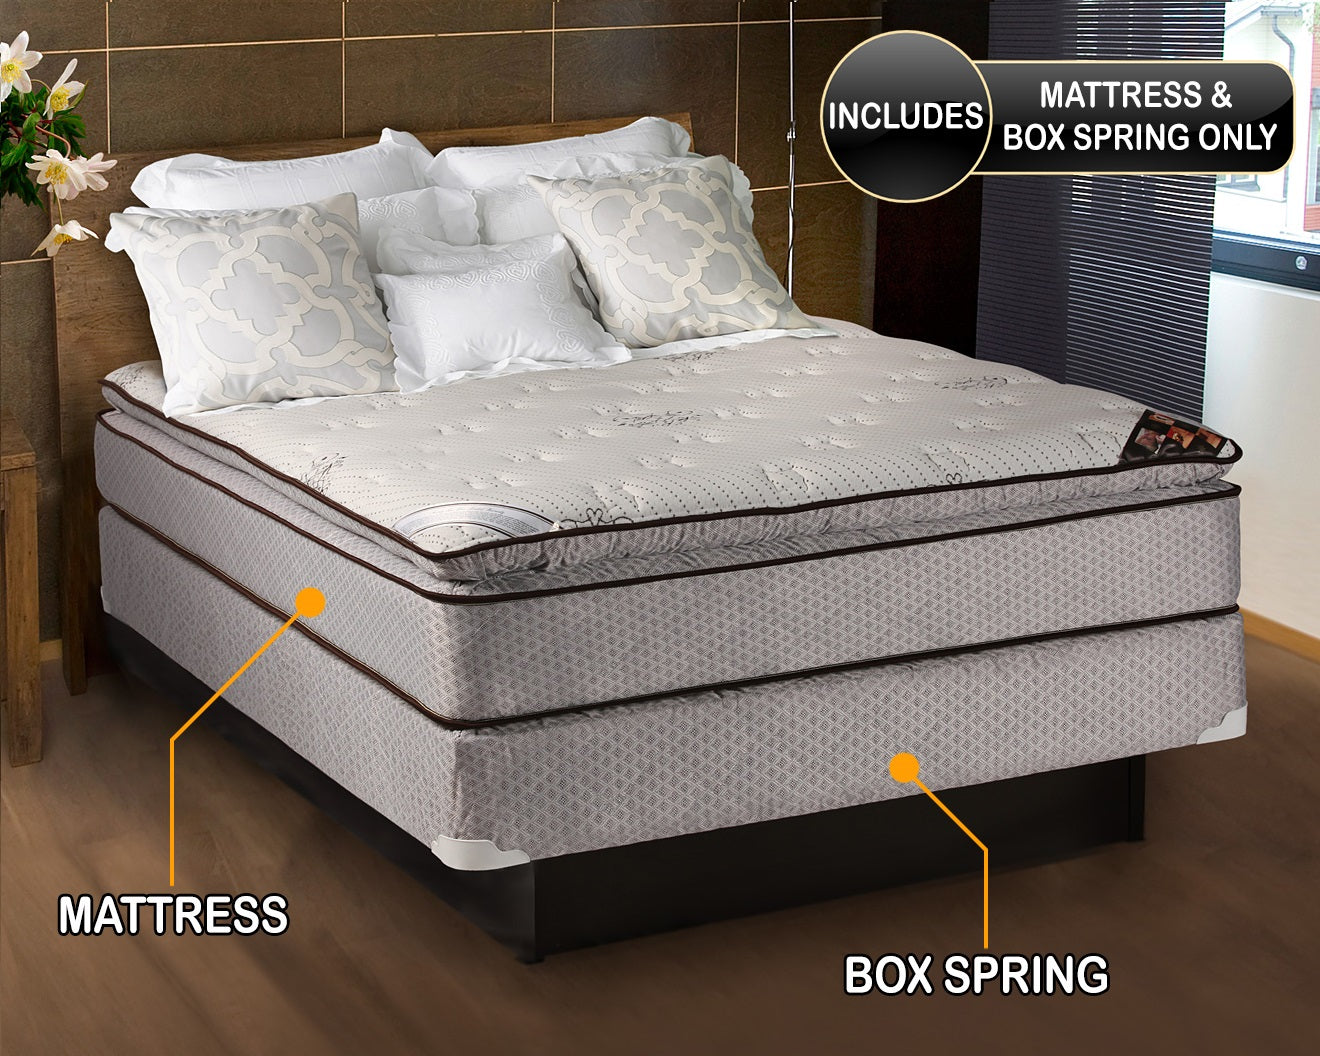 Beautiful Rest Queen Size Mattress And Box Springs Set